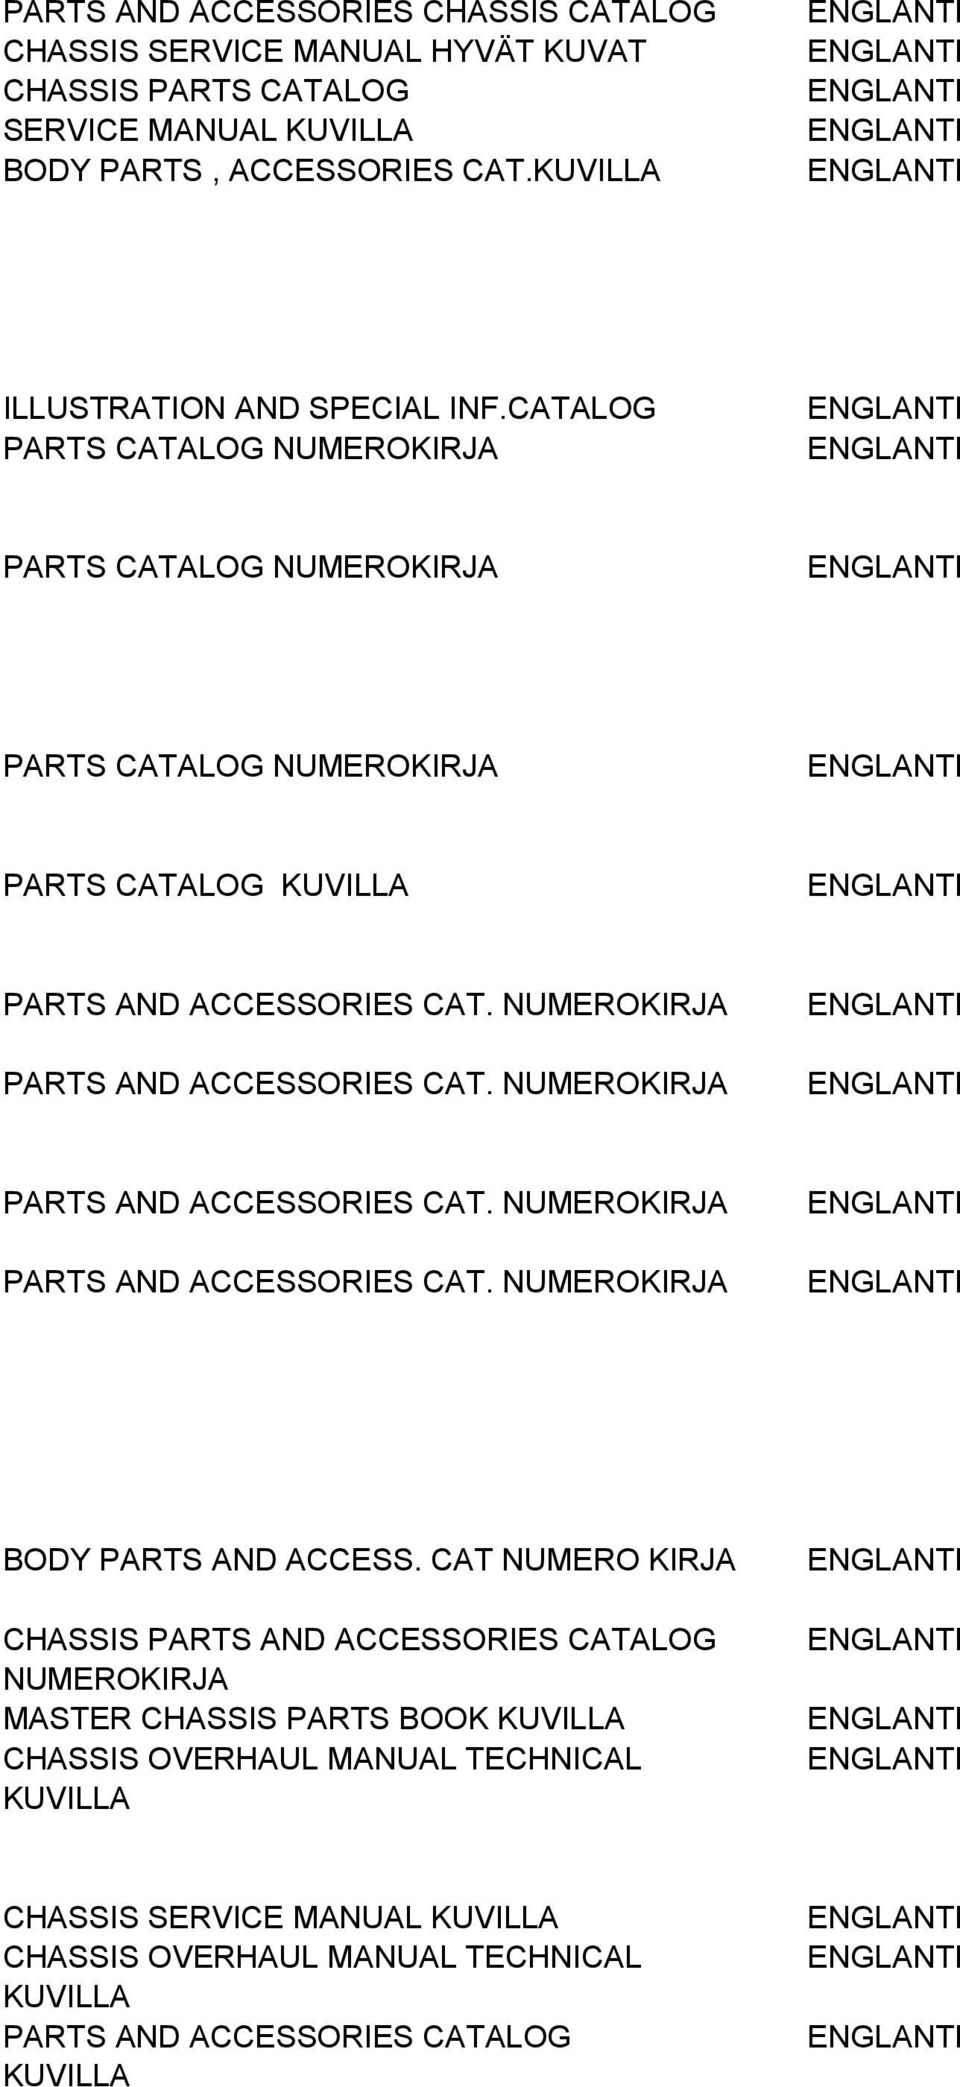 NUMEROKIRJA PARTS AND ACCESSORIES CAT. NUMEROKIRJA PARTS AND ACCESSORIES CAT. NUMEROKIRJA BODY PARTS AND ACCESS.